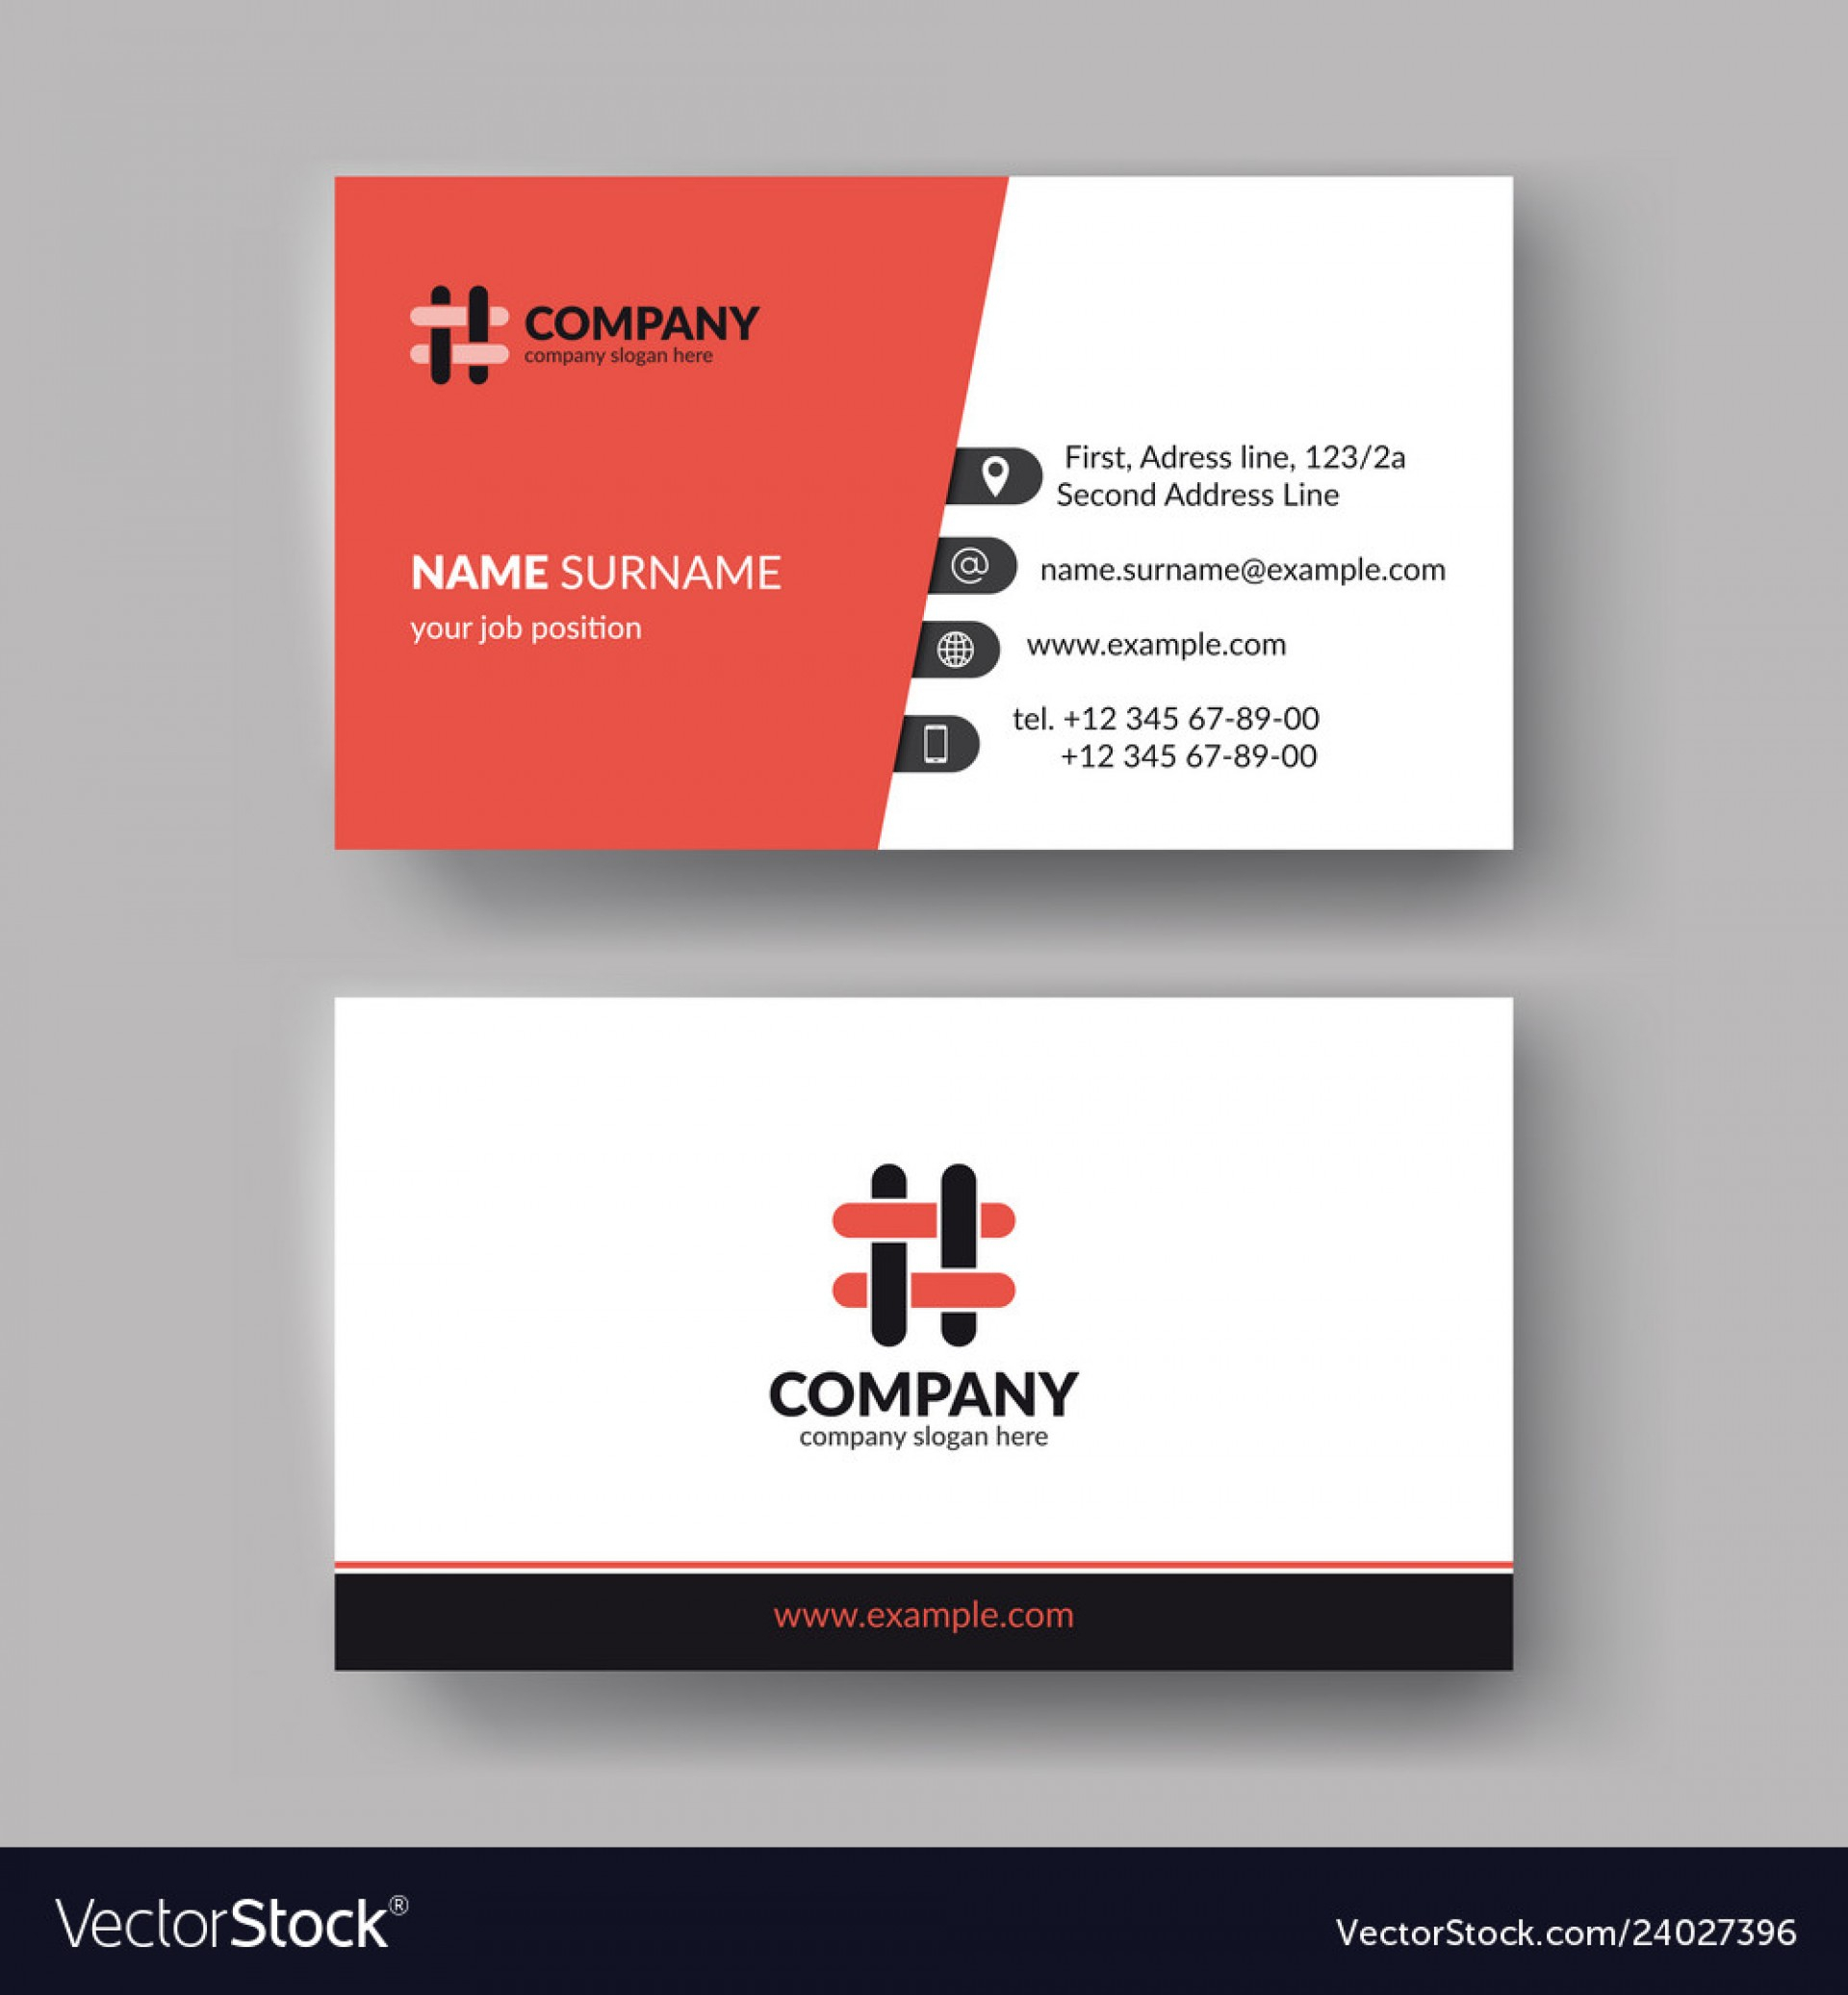 034 Free Business Card Template Ideas Shocking Templates Psd Throughout Adobe Illustrator Card Template